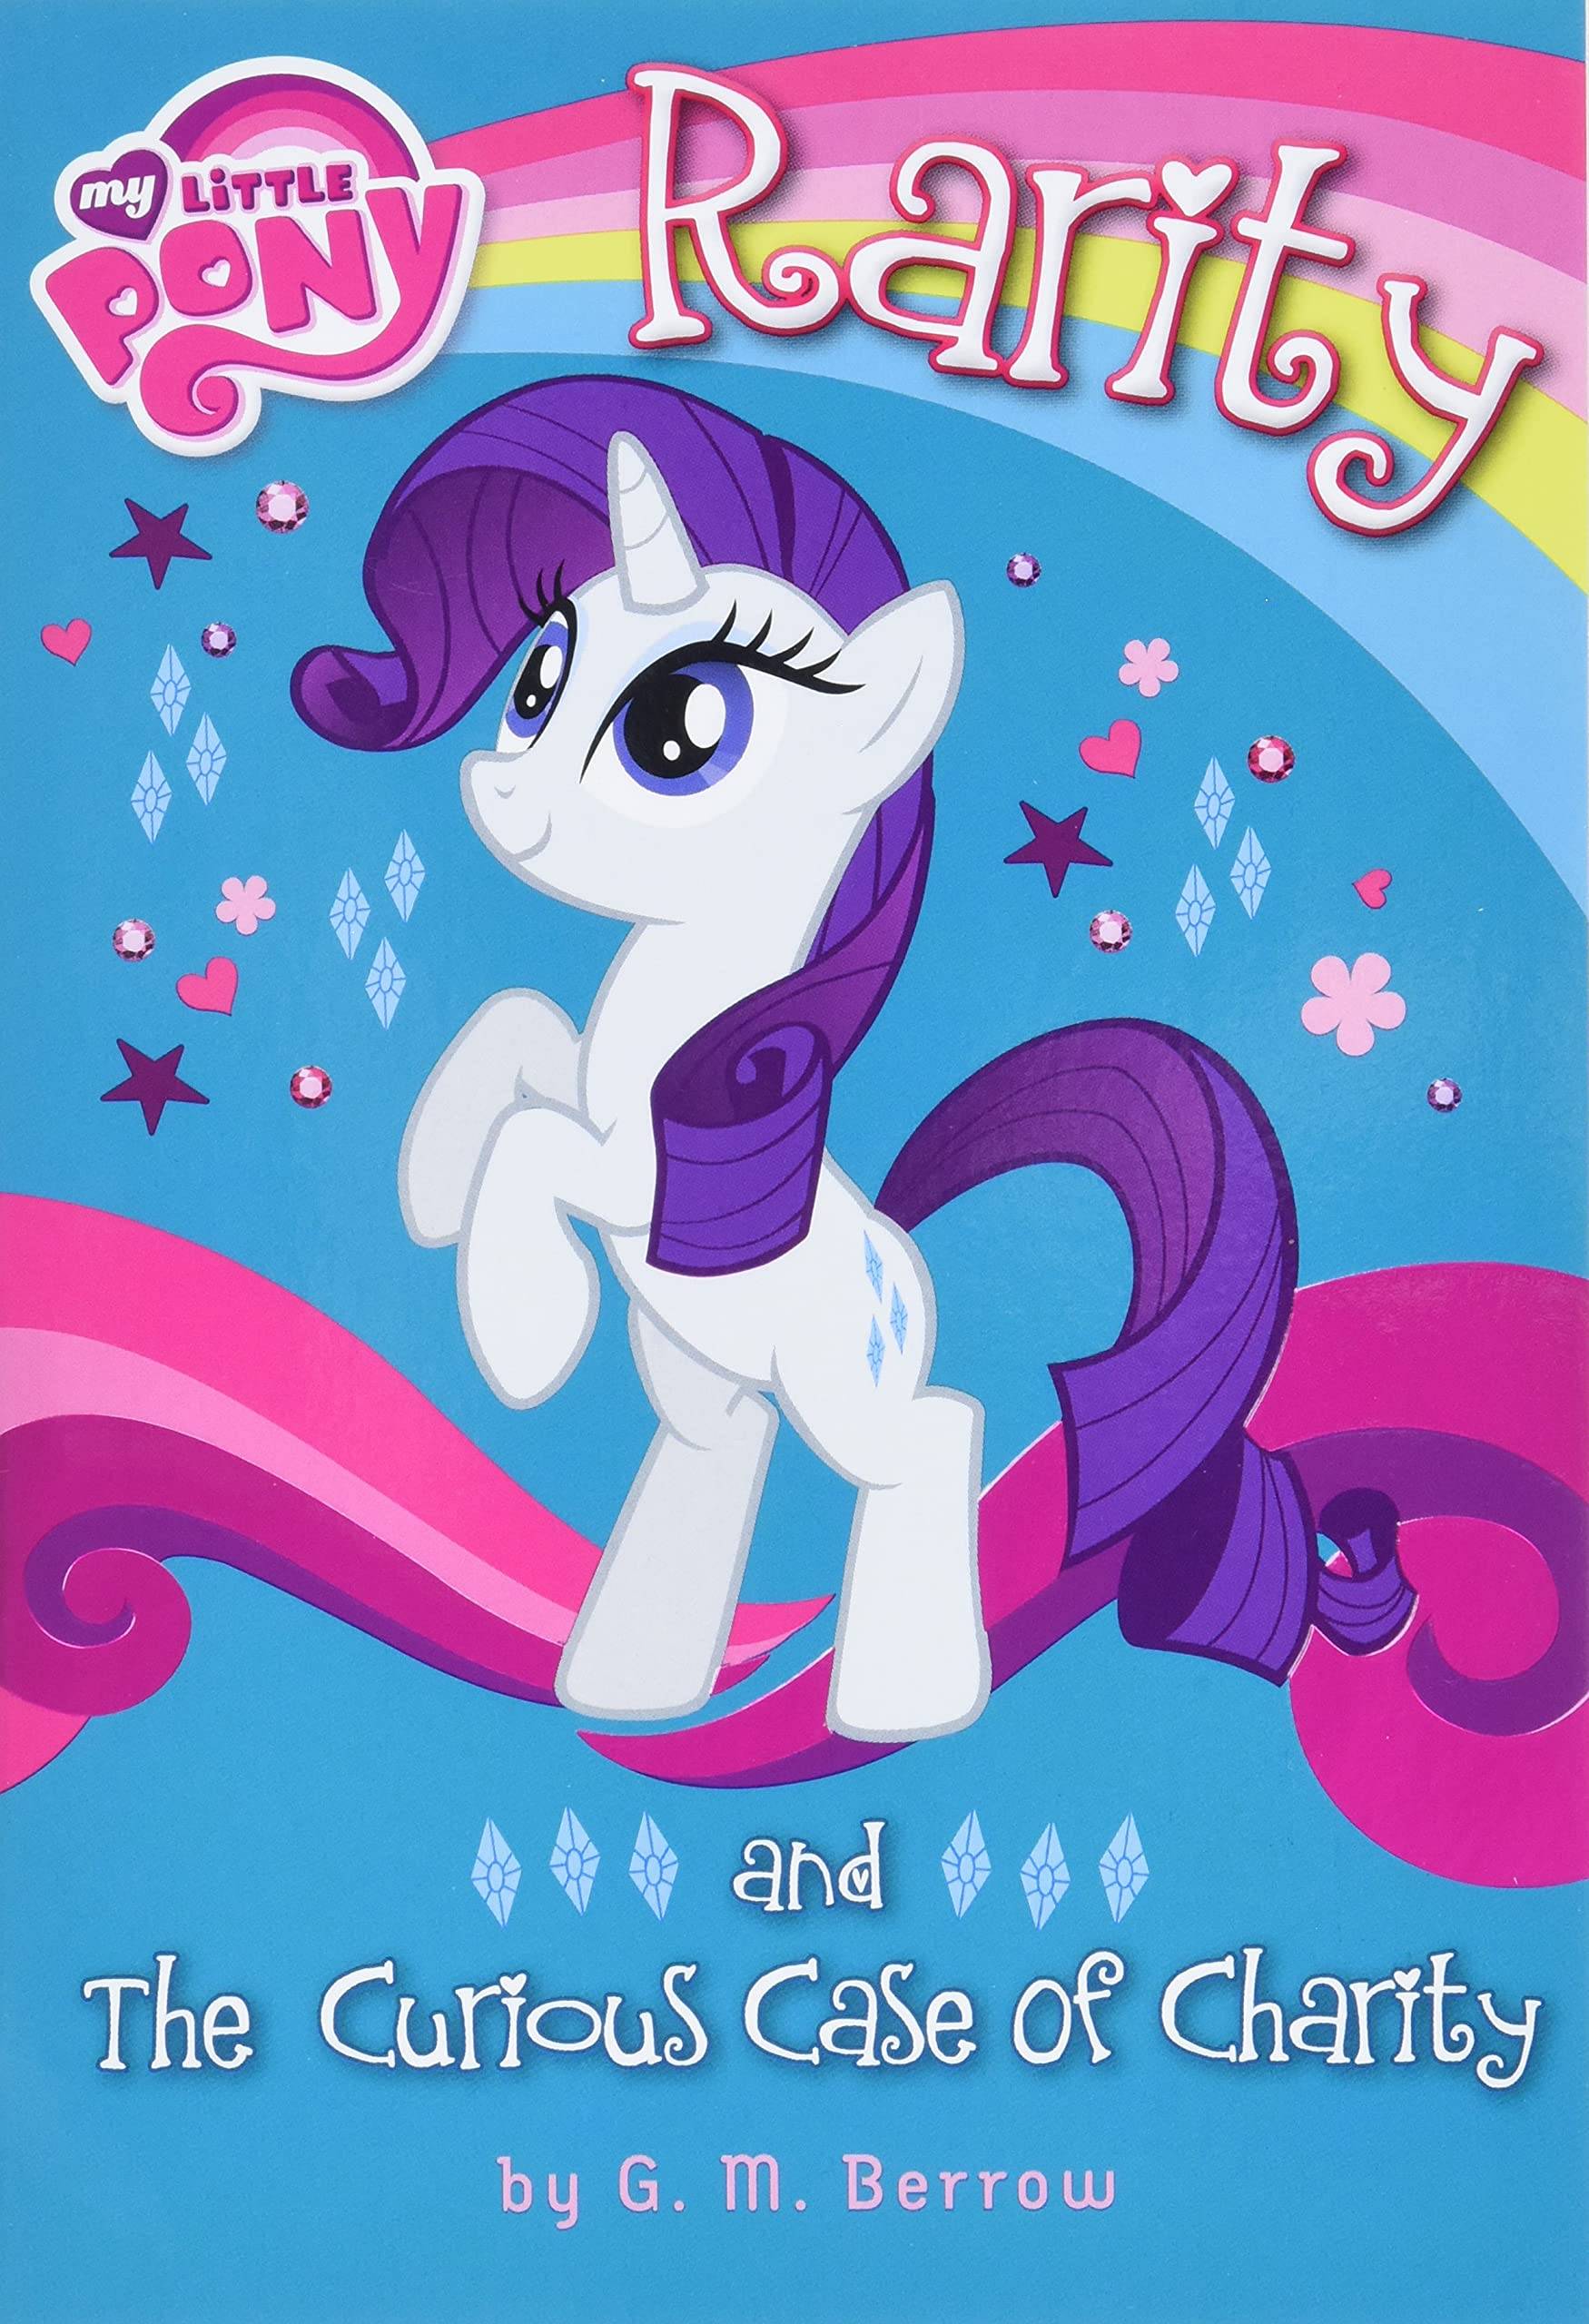 IMG : My Little Pony Rarity and the Curious Case of Charity